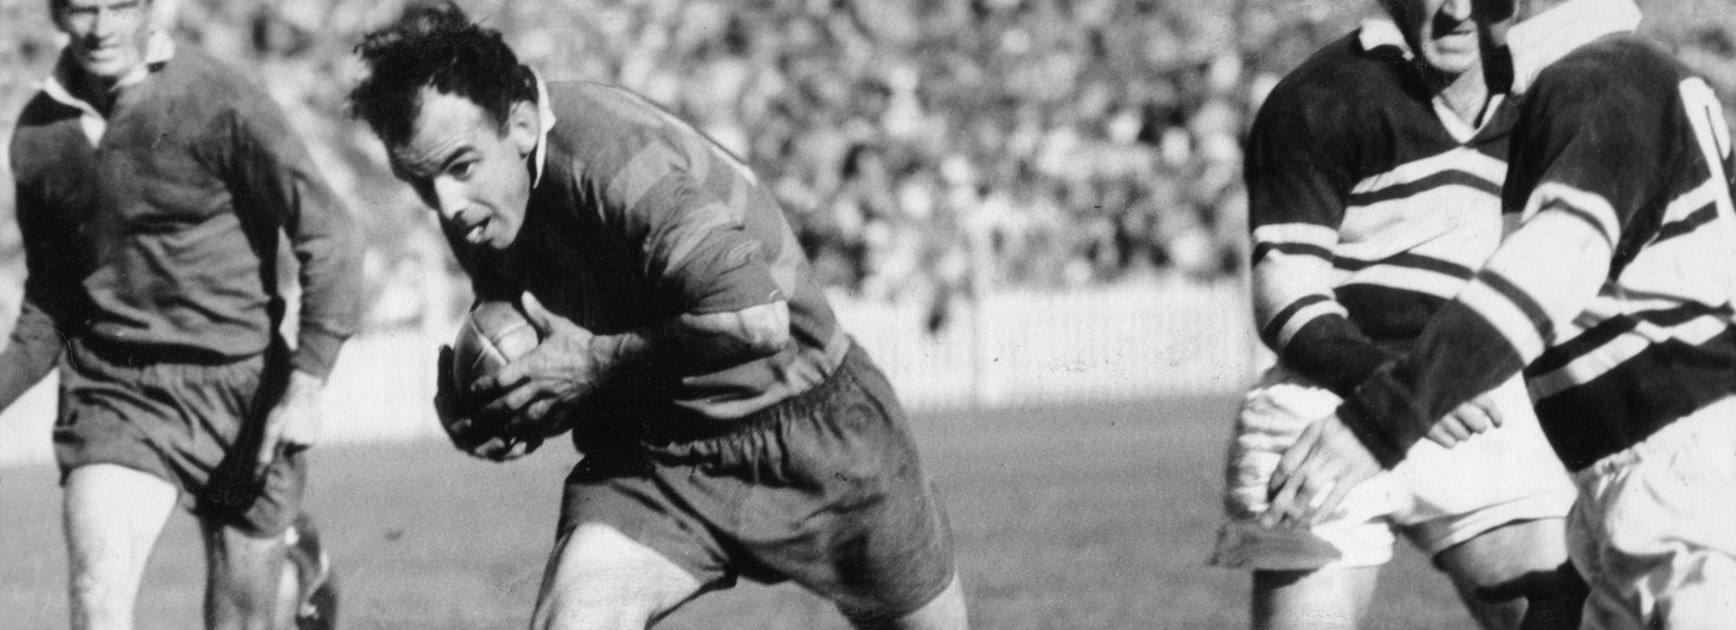 Clive Churchill playing for Souths against Wests in the 1950s.